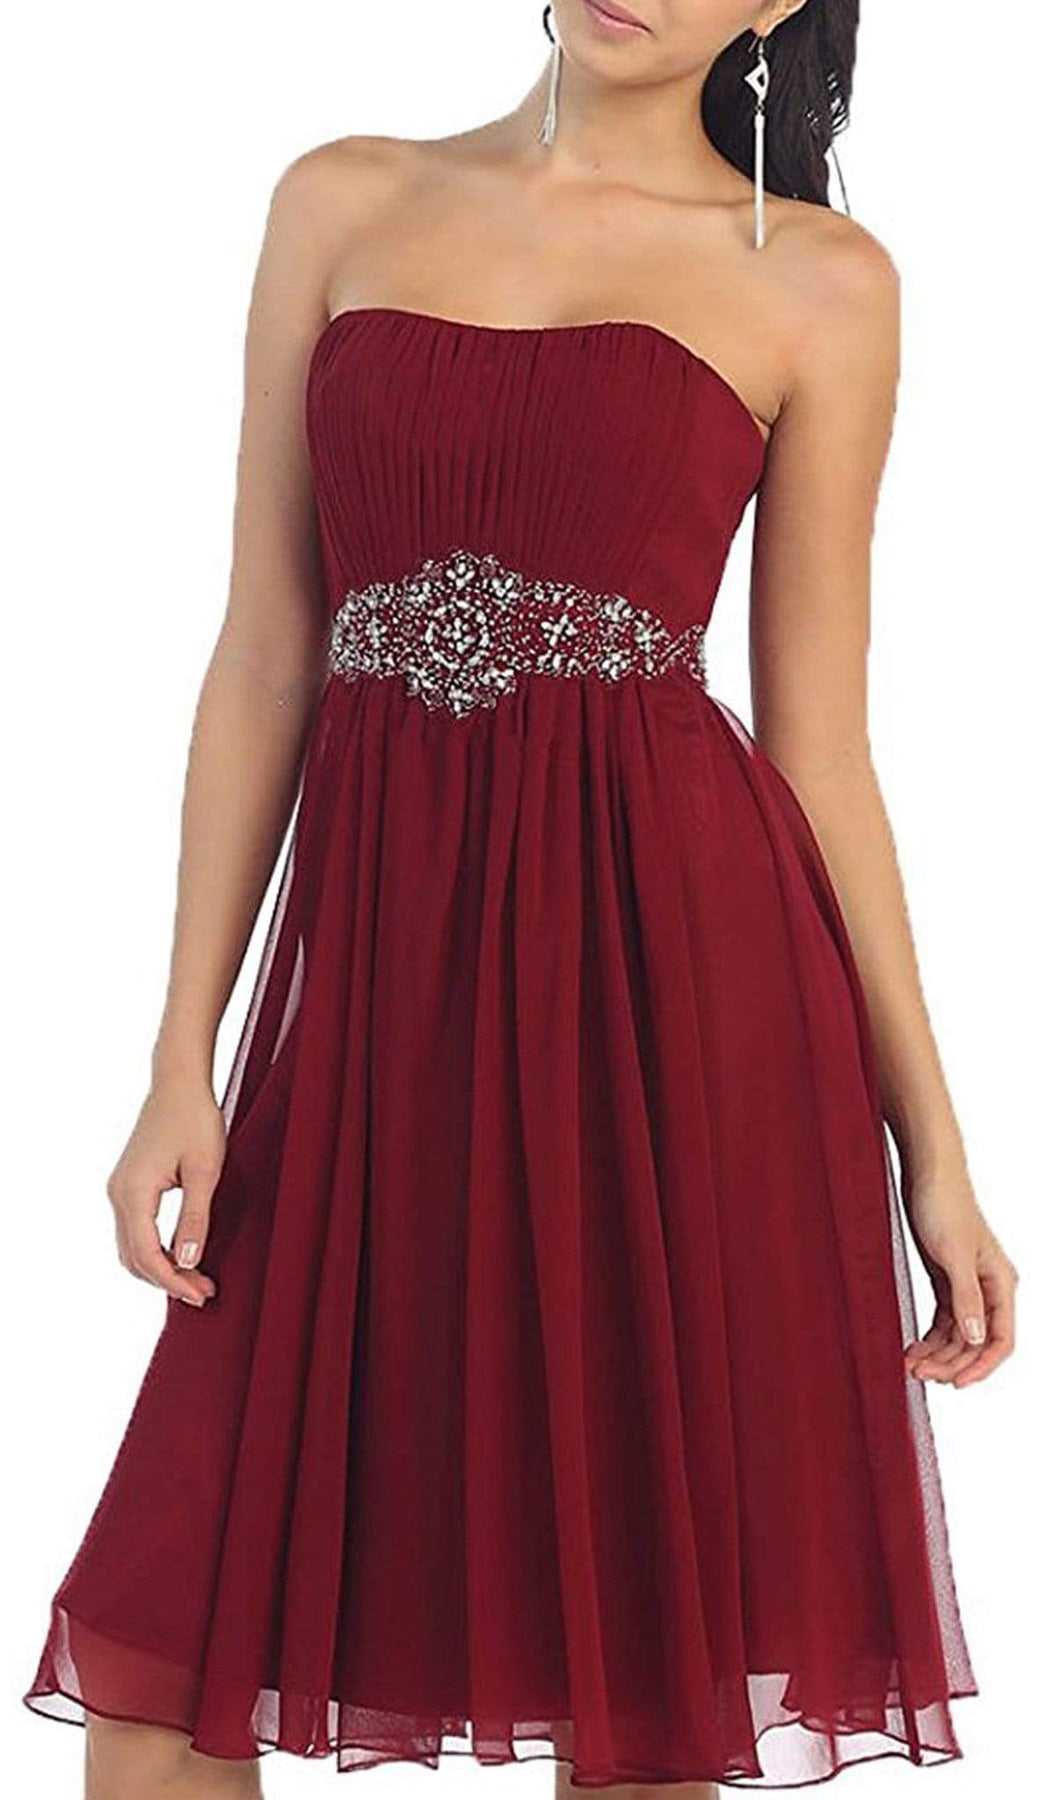 May Queen - MQ711B Pleated Sweetheart Bejeweled Waist Cocktail Dress Special Occasion Dress